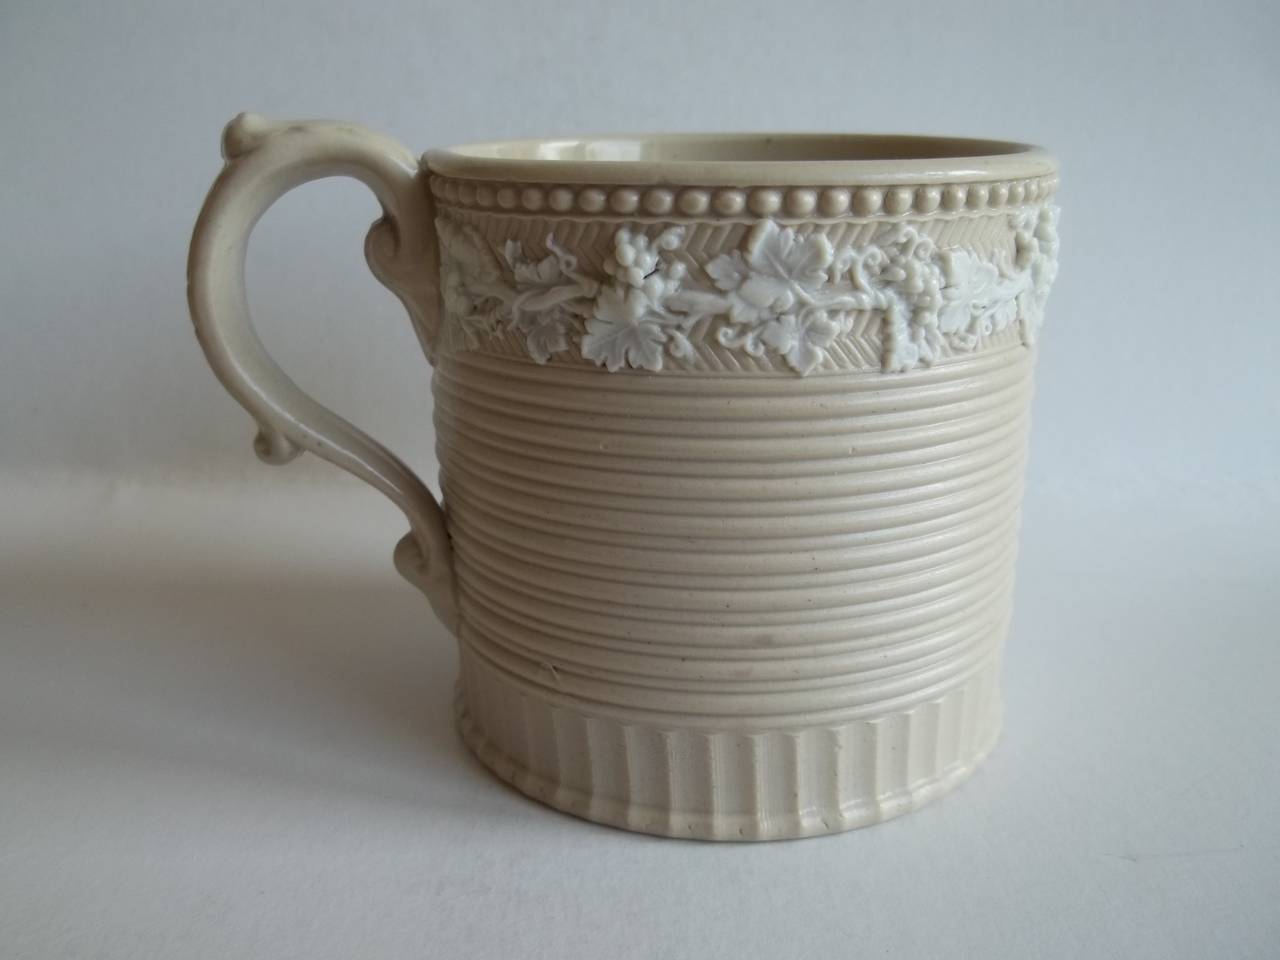 This is a large Coffee Can or Mug which I attribute to the Wedgwood factory.

The mug is cylindrical in form with a loop handle having upper and lower spurs. and shell-like moulded terminals, where the handle meets the body.The dark cream / stone